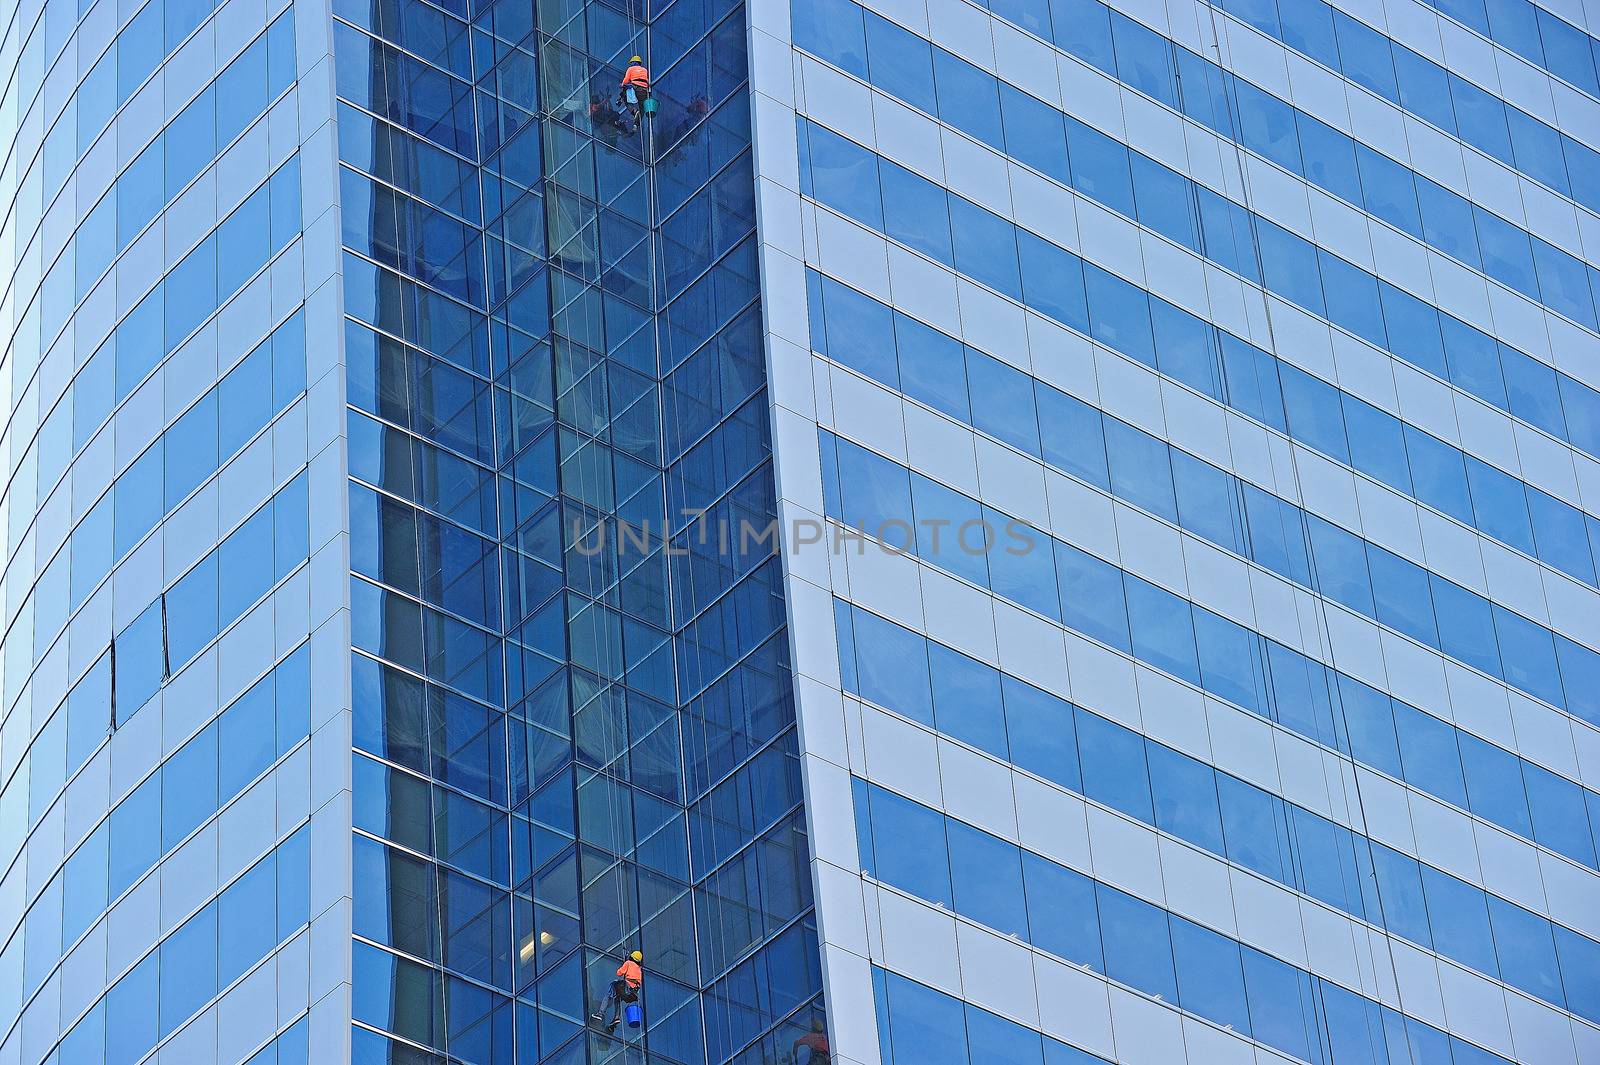 Workers suspended on a scaffold high up on a blue glass skyscrap by think4photop